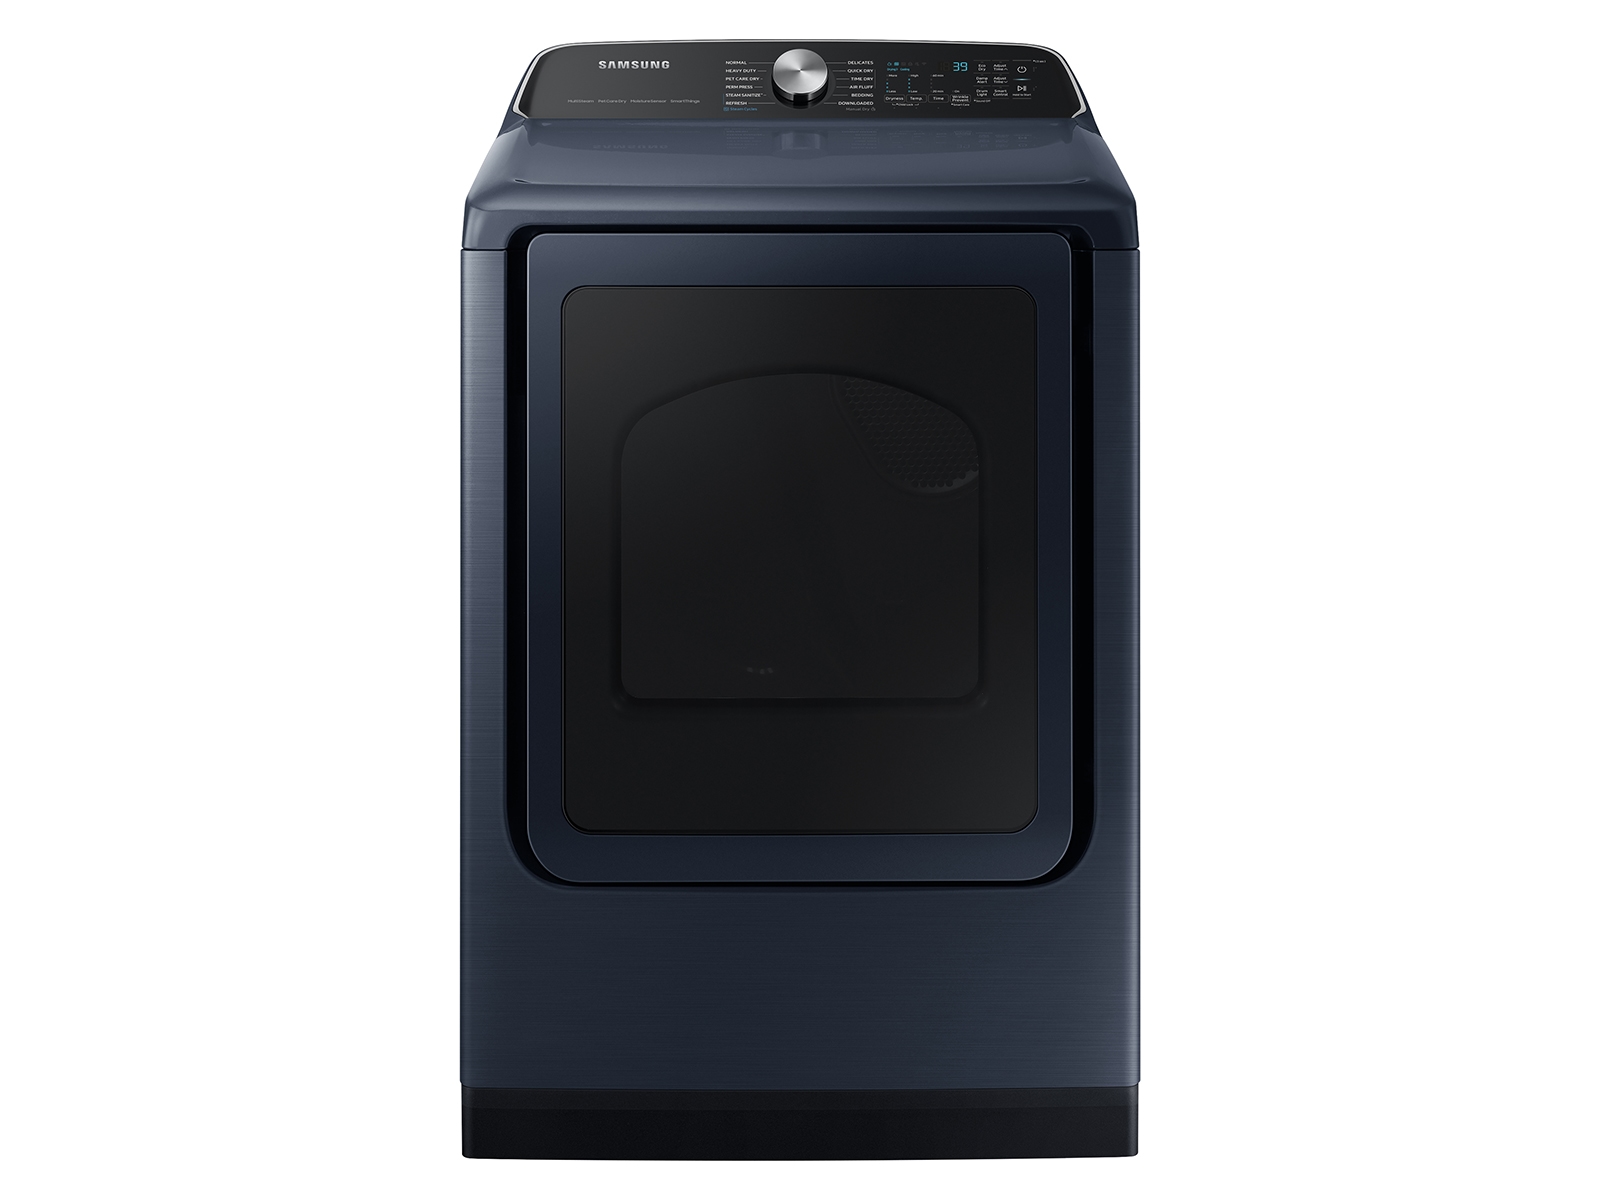 Samsung 7.4 cu. ft. Smart Gas Dryer with Pet Care Dry and Steam Sanitize+ in Brushed Navy Blue(DVG54CG7150DA3)